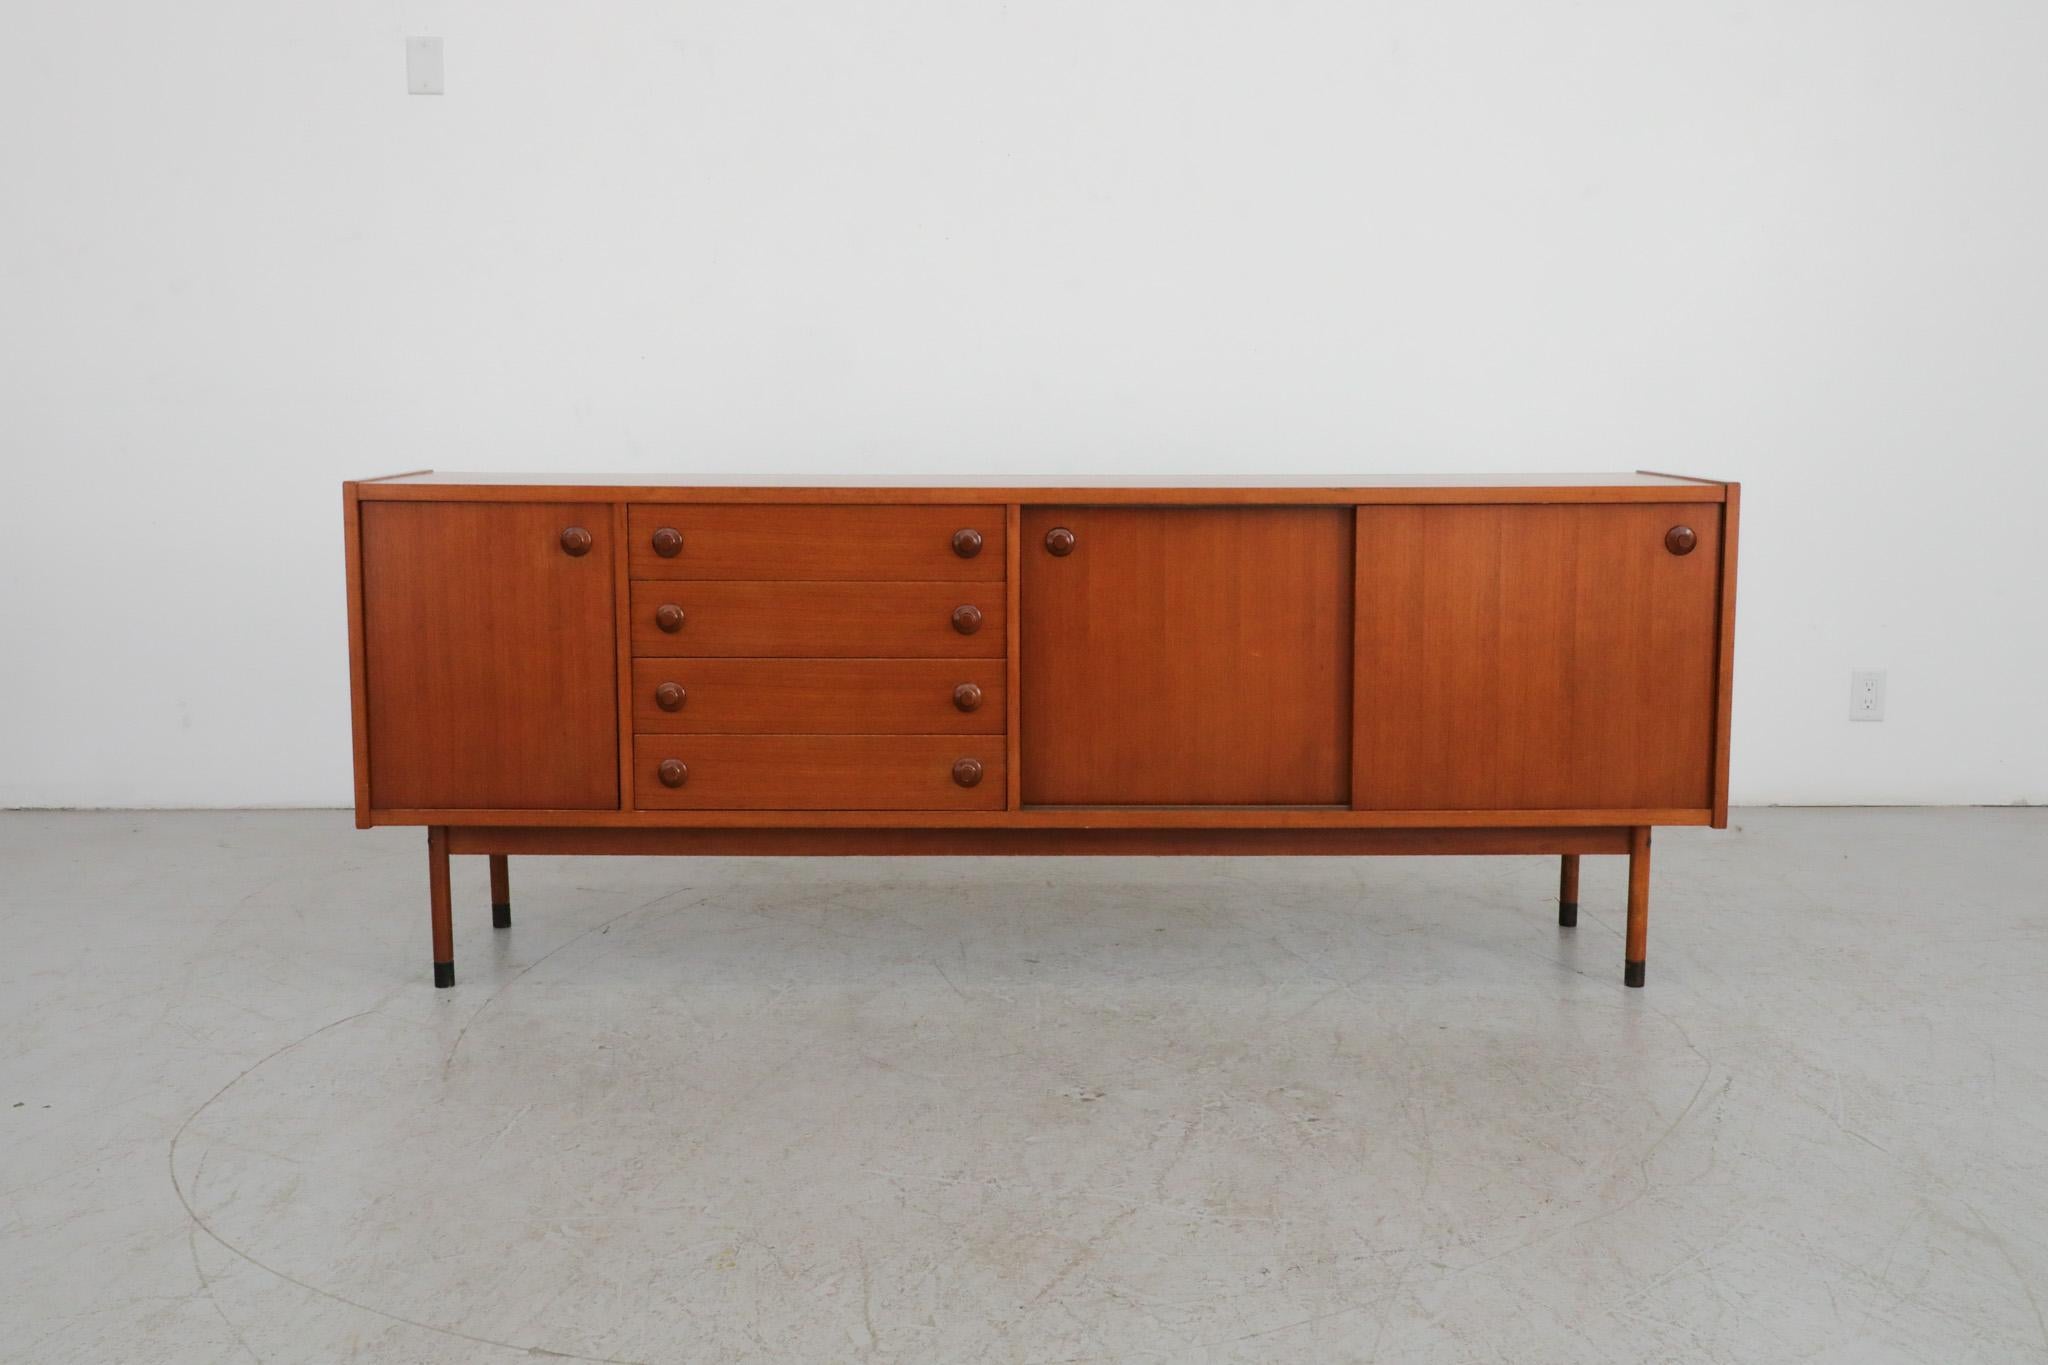 Stunning, Italian mid-century sideboard, circa 1960s. Crafted out of beautifully toned teak with four center drawers and two storage cabinets. The top drawer still contains the original silverware/utensil dividers and the credenza has a sliding door